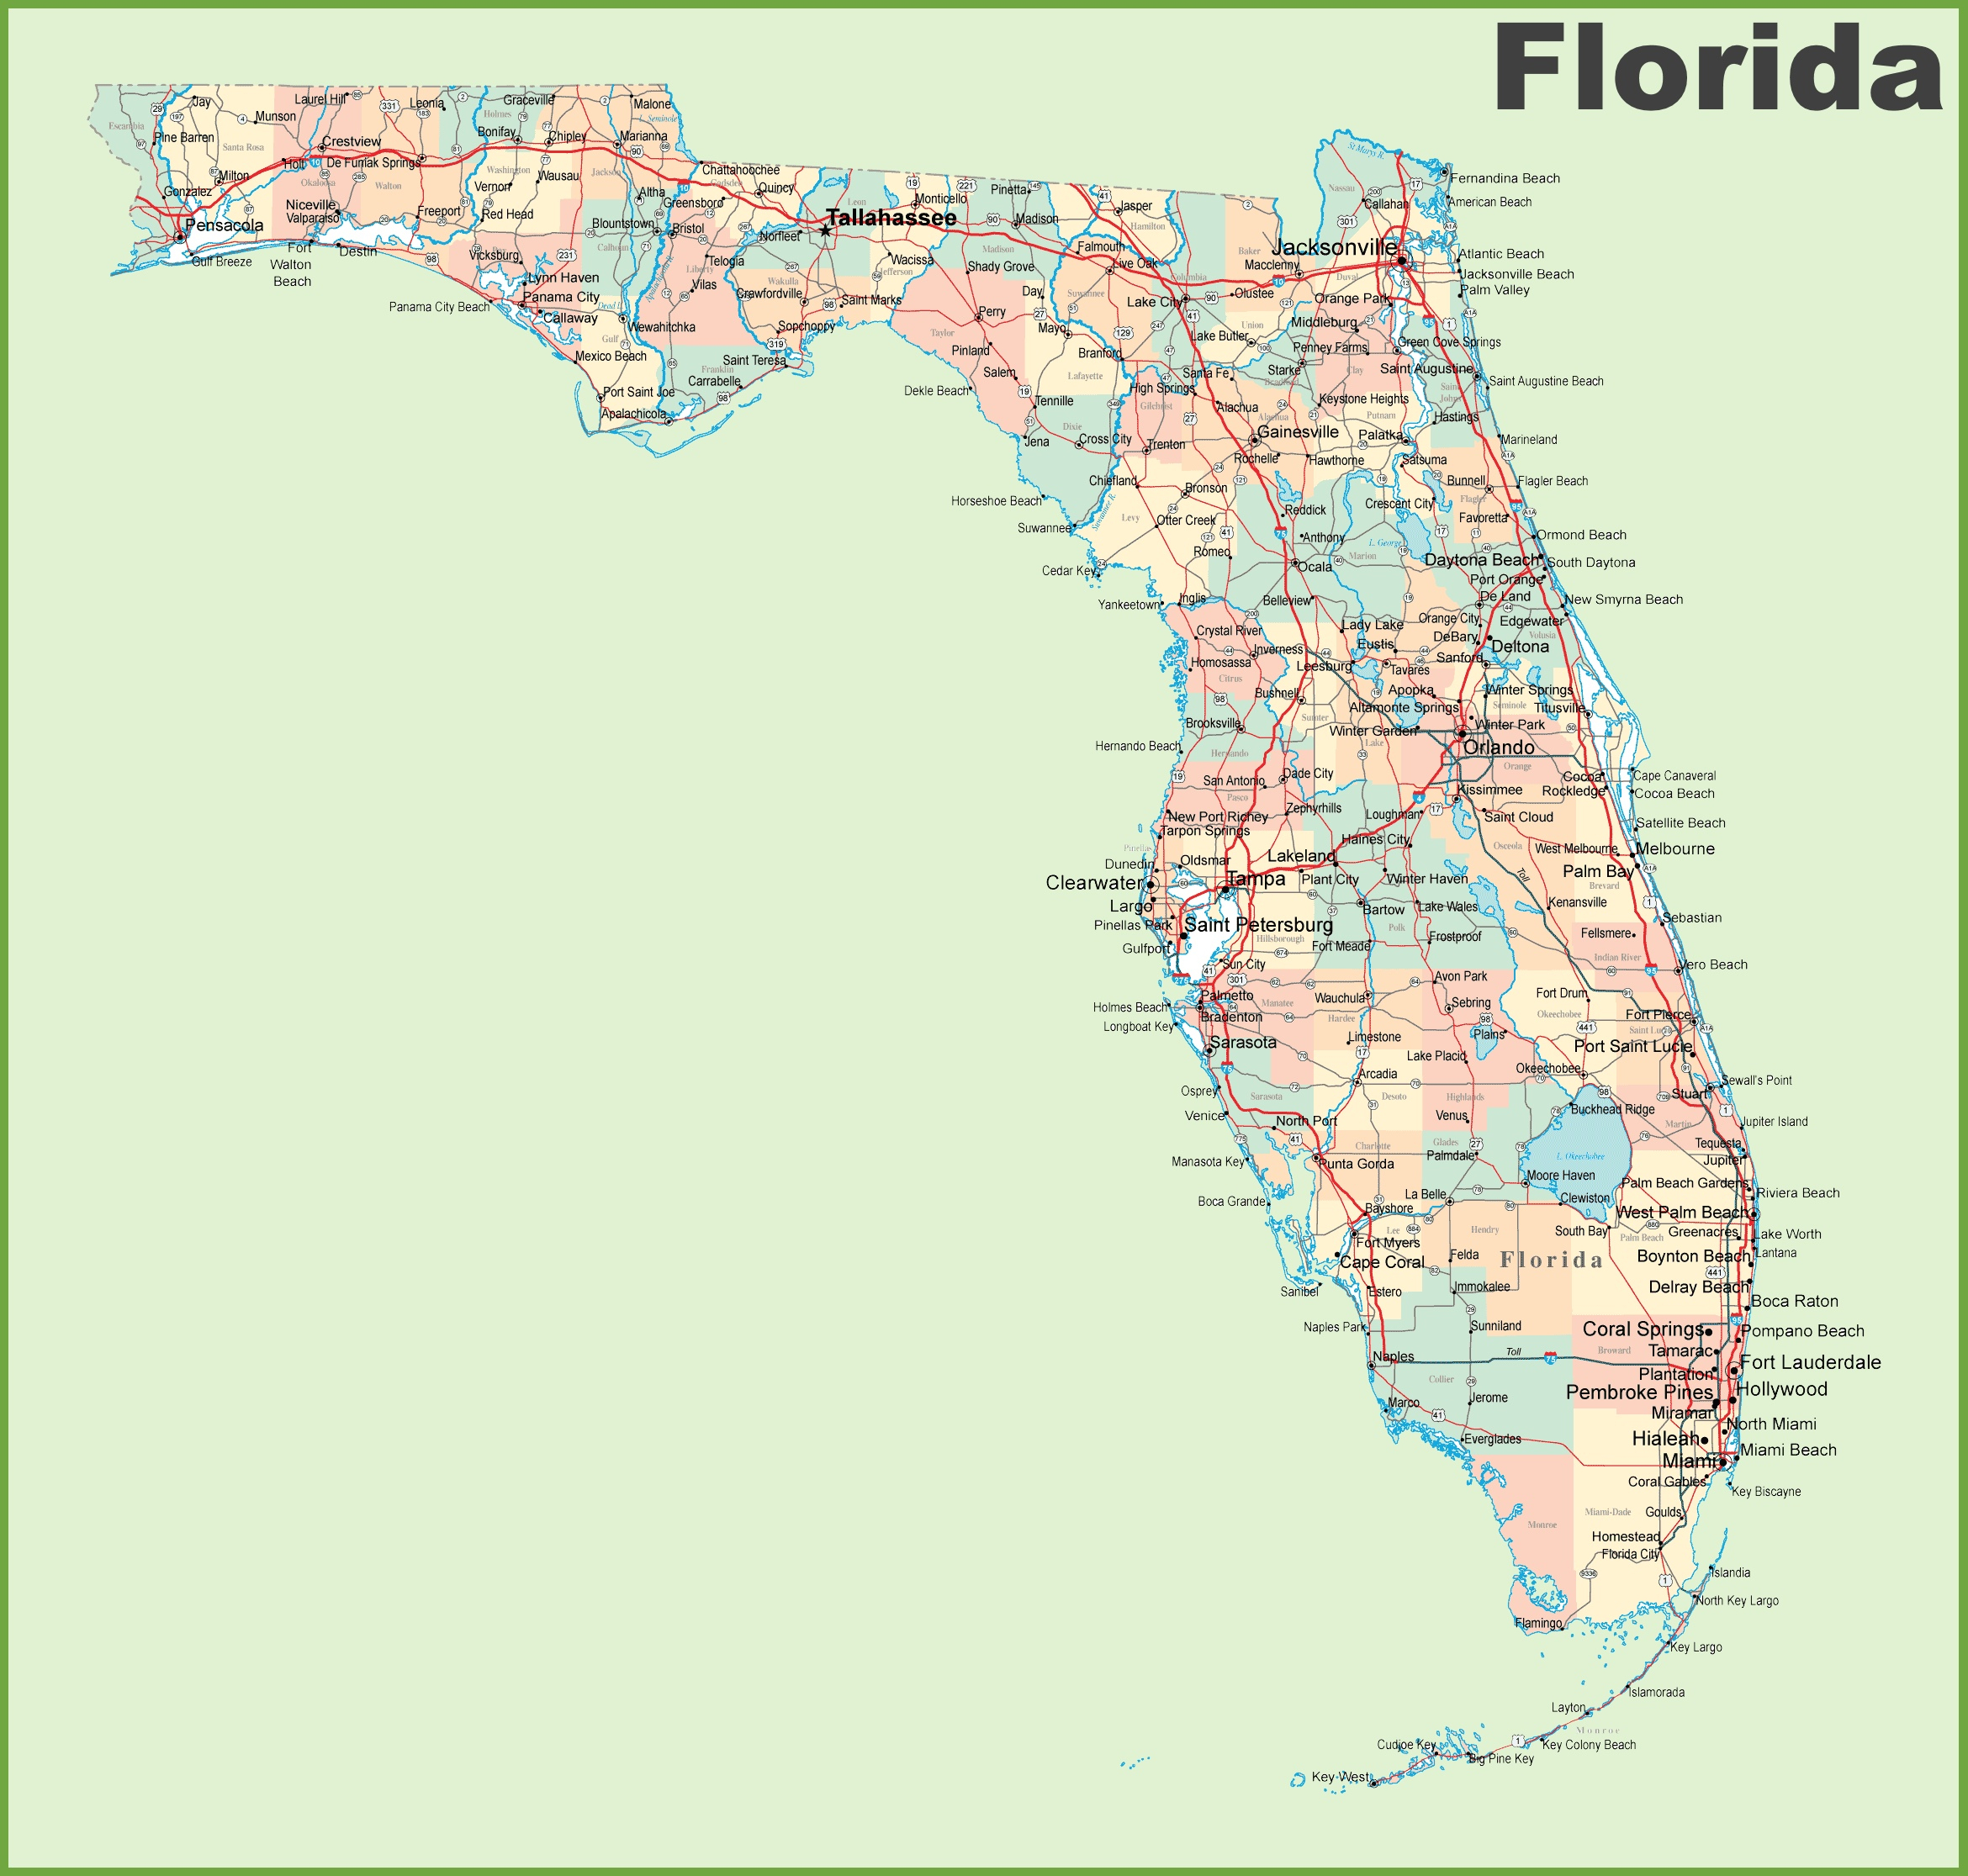 Florida Road Map With Cities And Towns - Florida Road Map Google